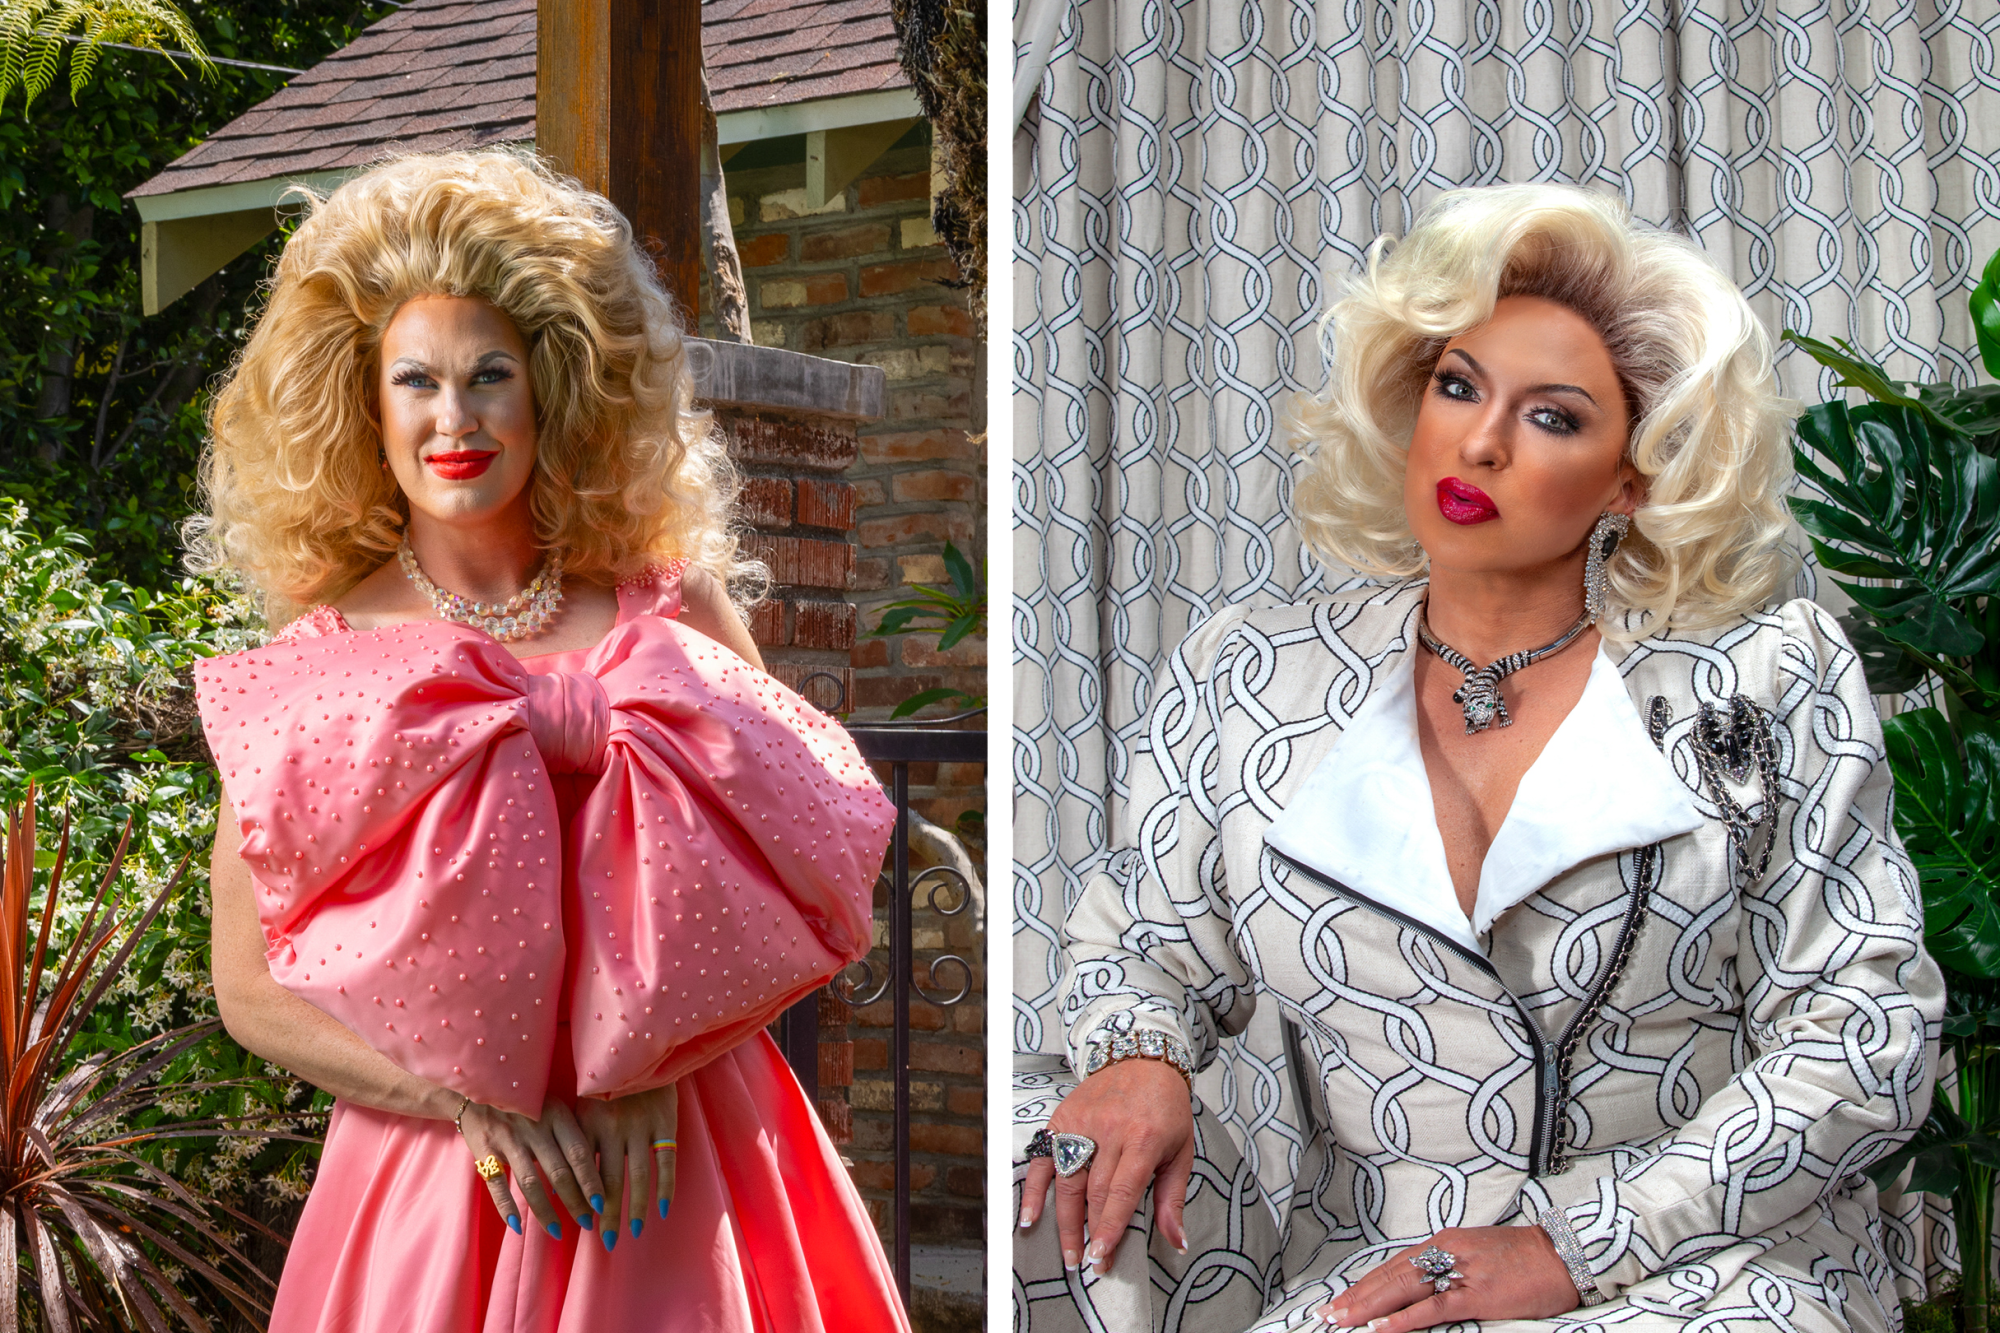 Two drag queens appear in photos. The one on the left is standing, while the other is sitting in a chair.